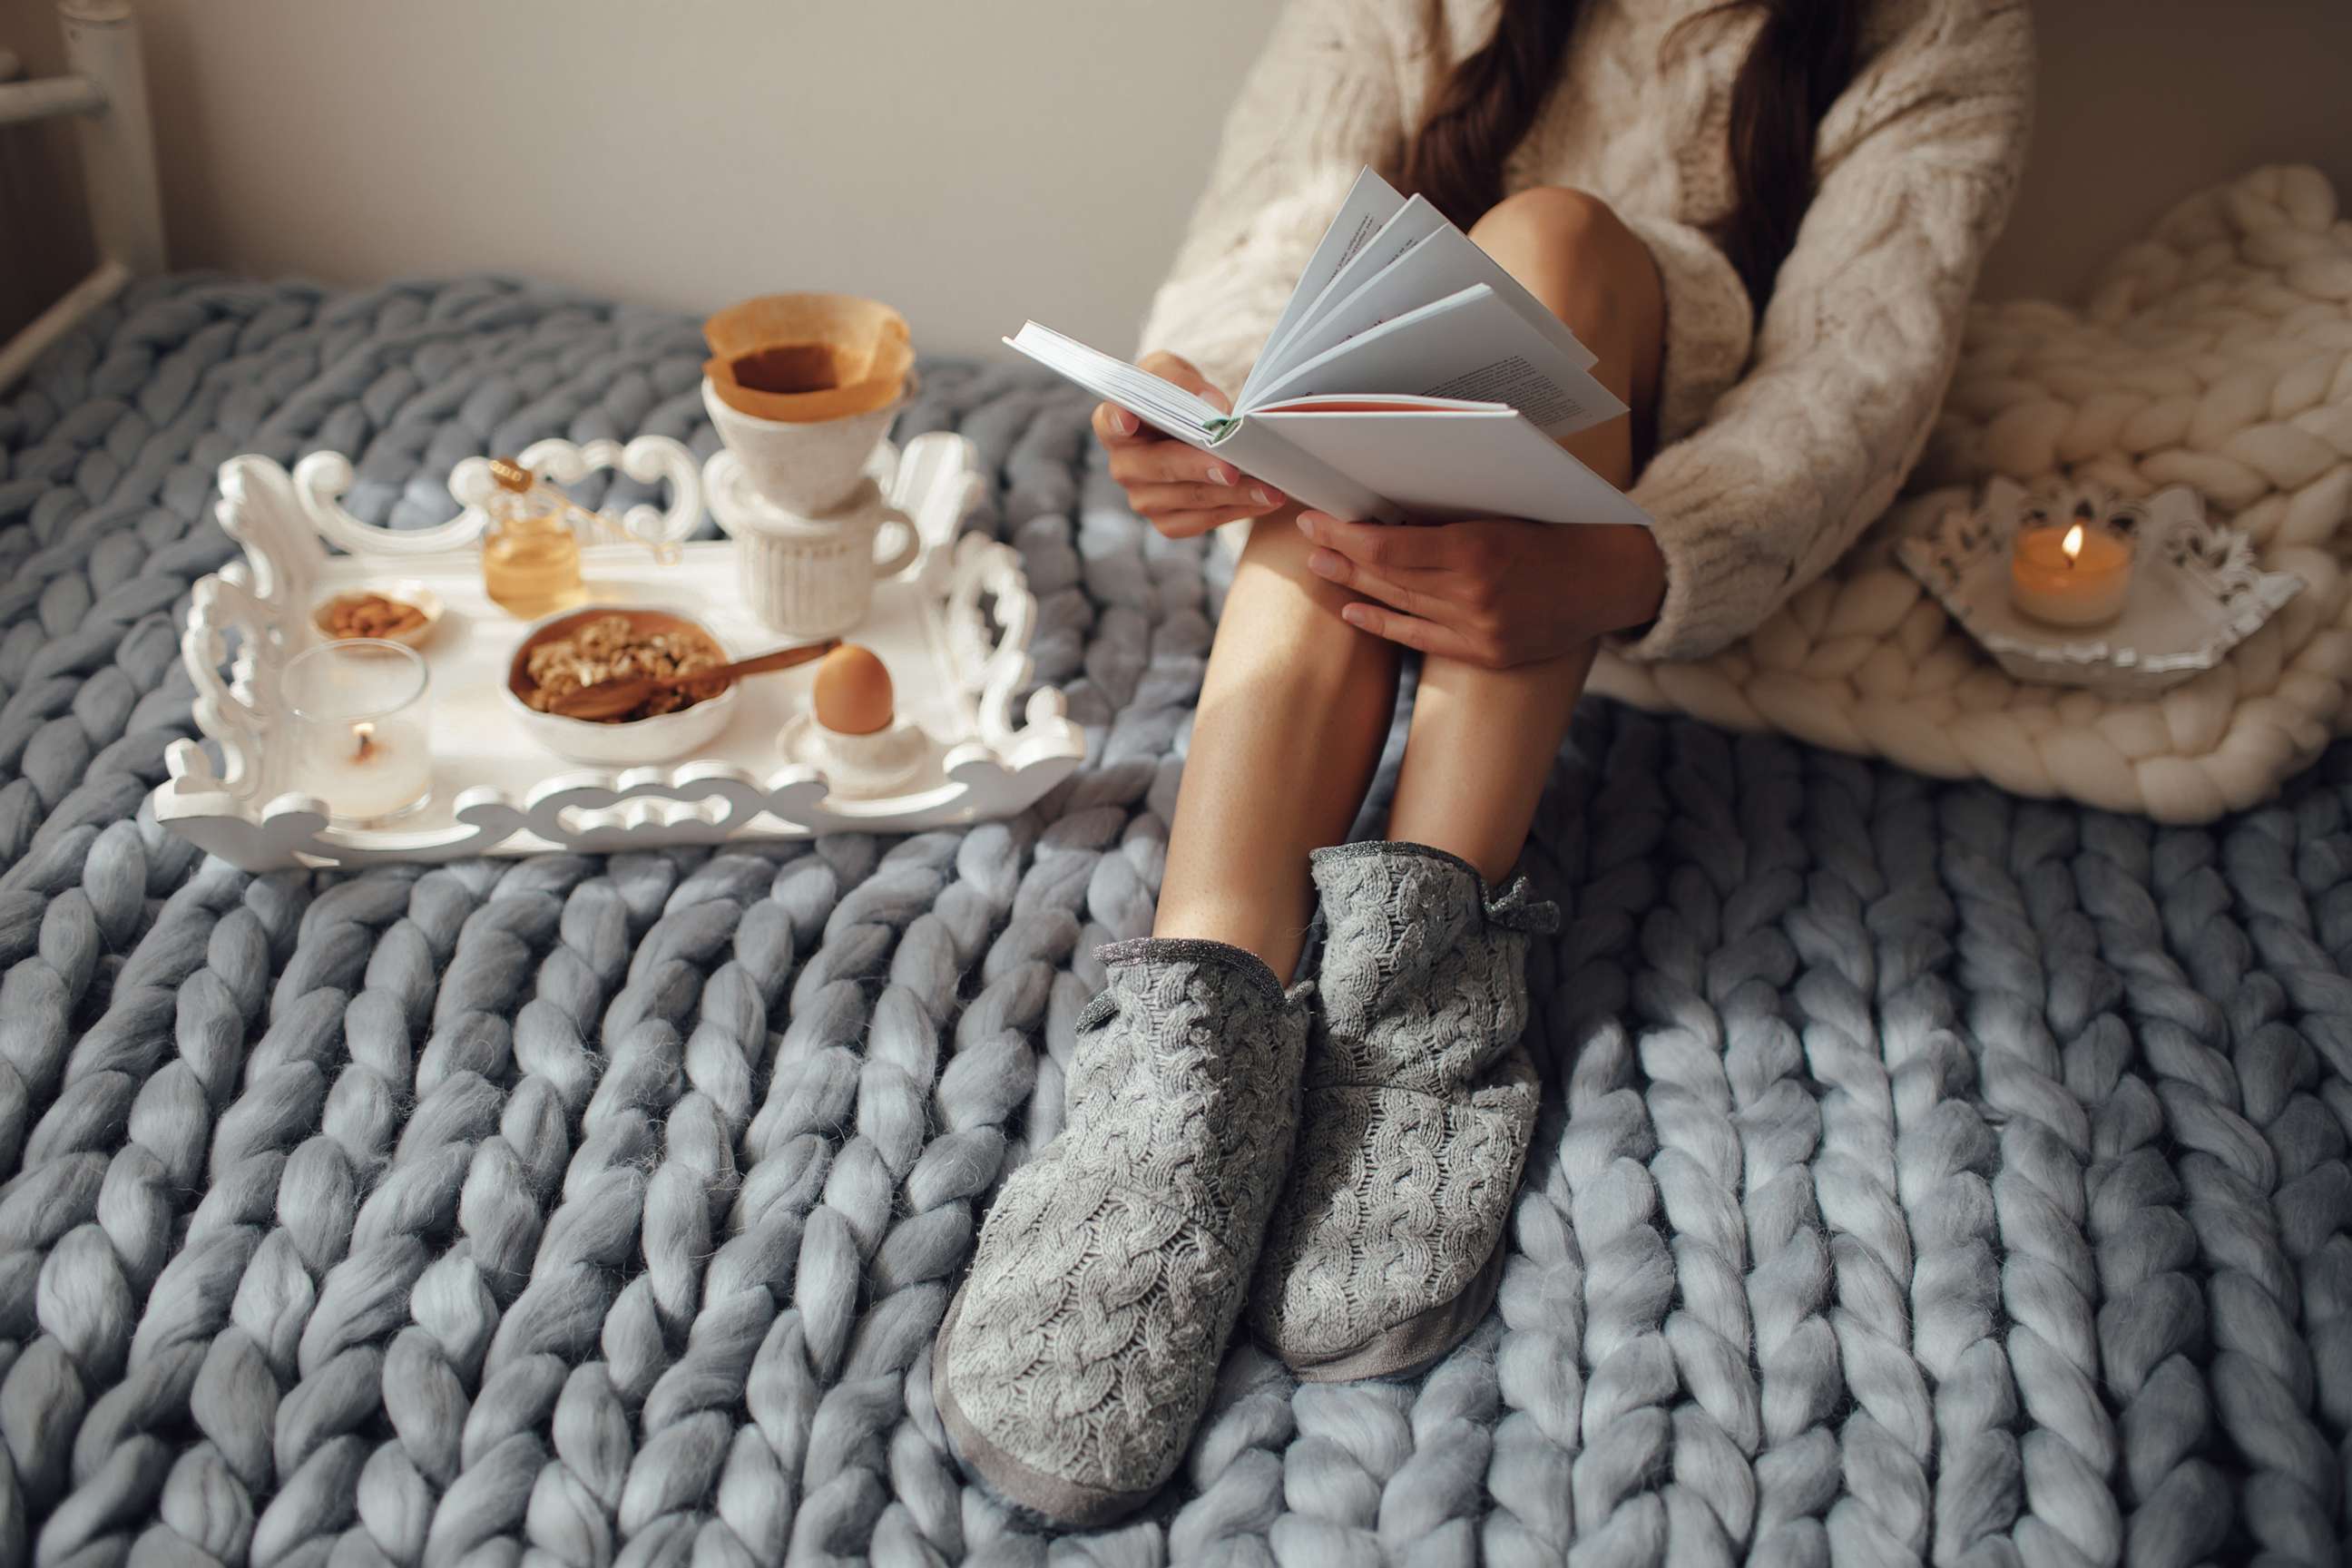 PHOTO: Woman with long hair drinking hot coffee and reading book in bed.